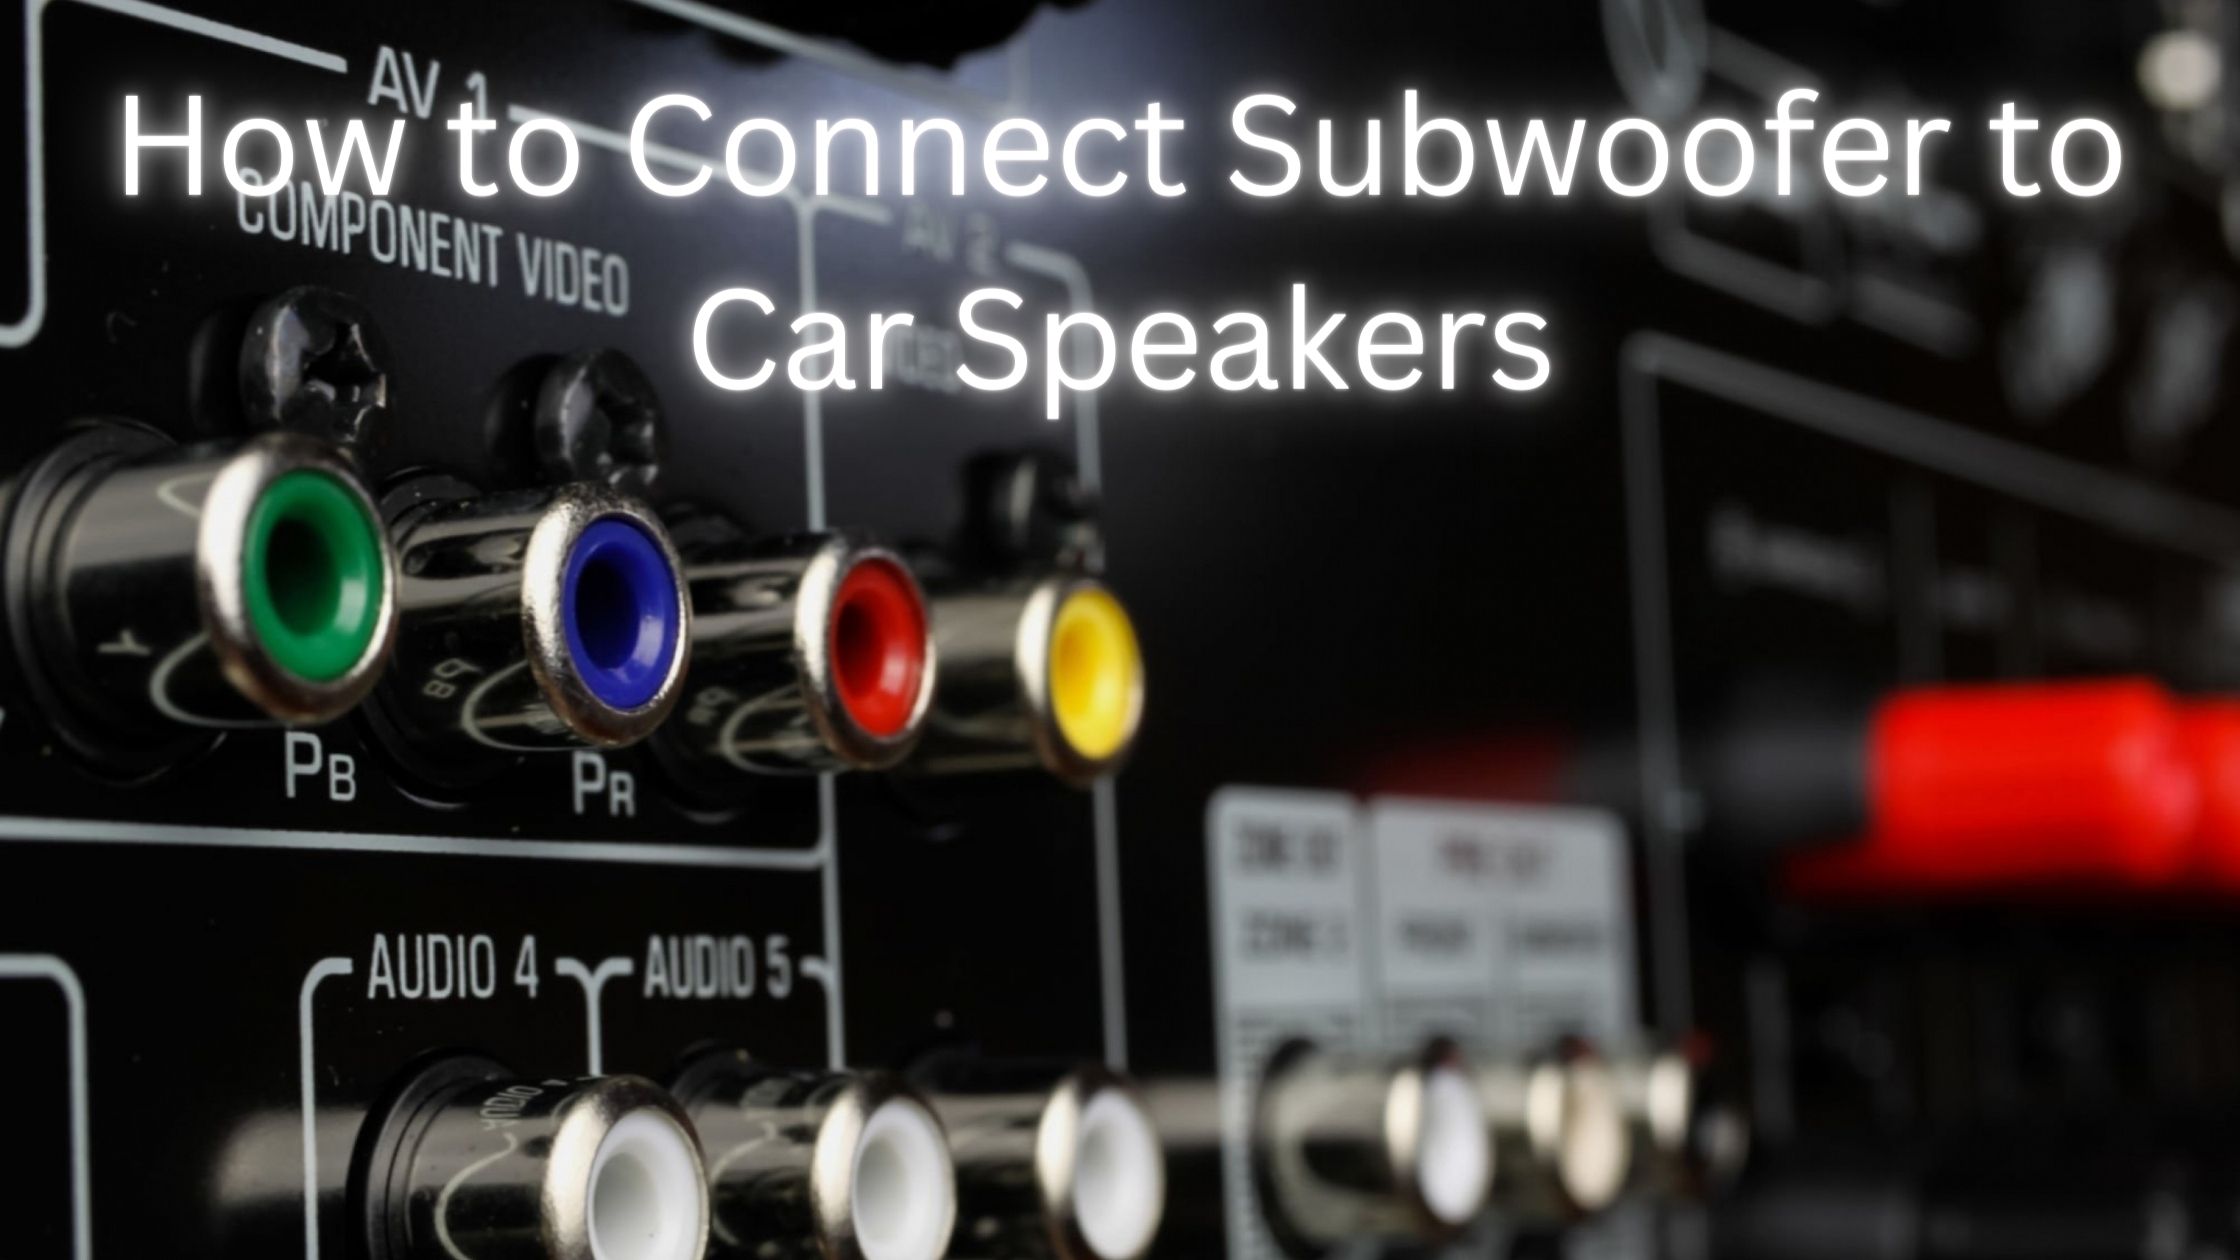 How to Connect Subwoofer to Car Speakers